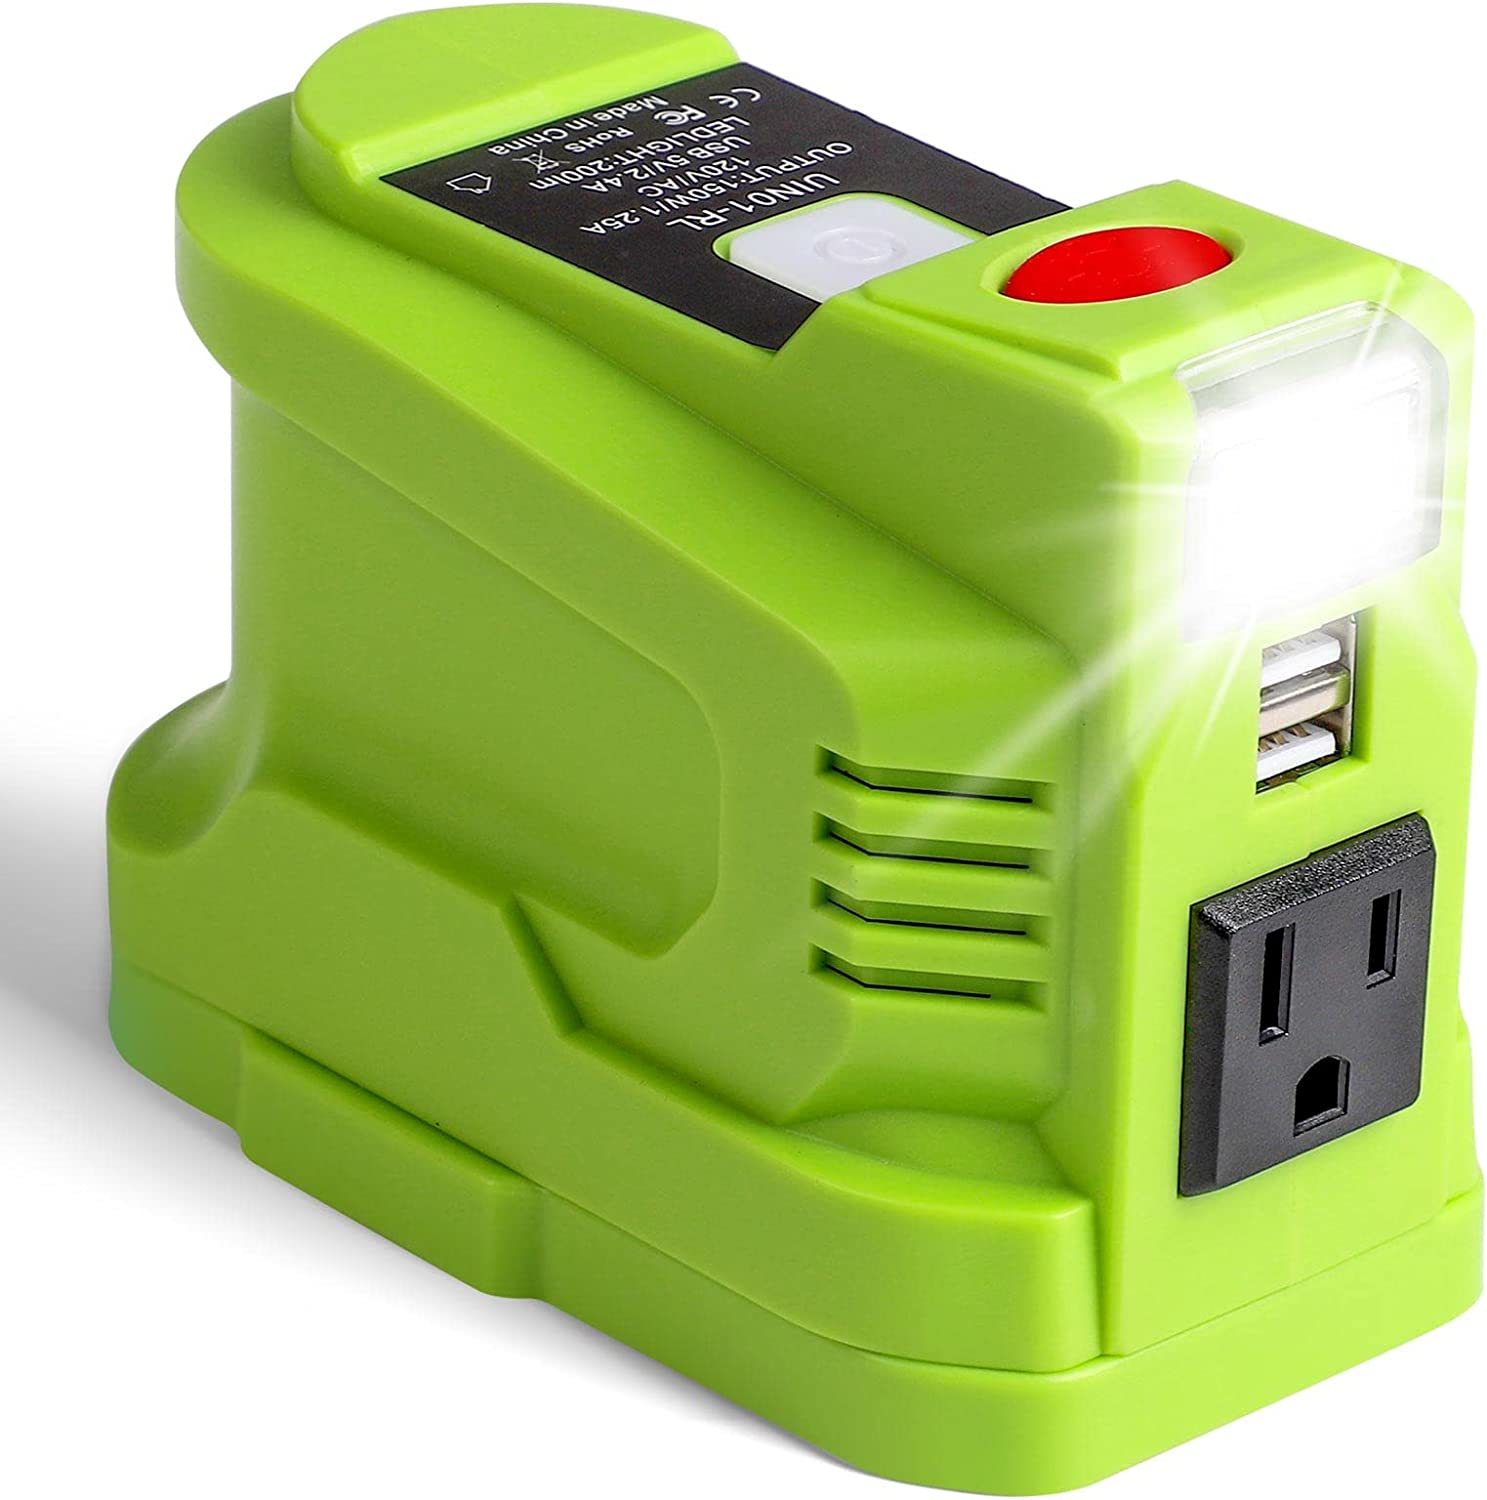 Primary image for Ryobi 18 Volt Lithium Battery Usb Charger Adapter, Ryobi Power Station With Led